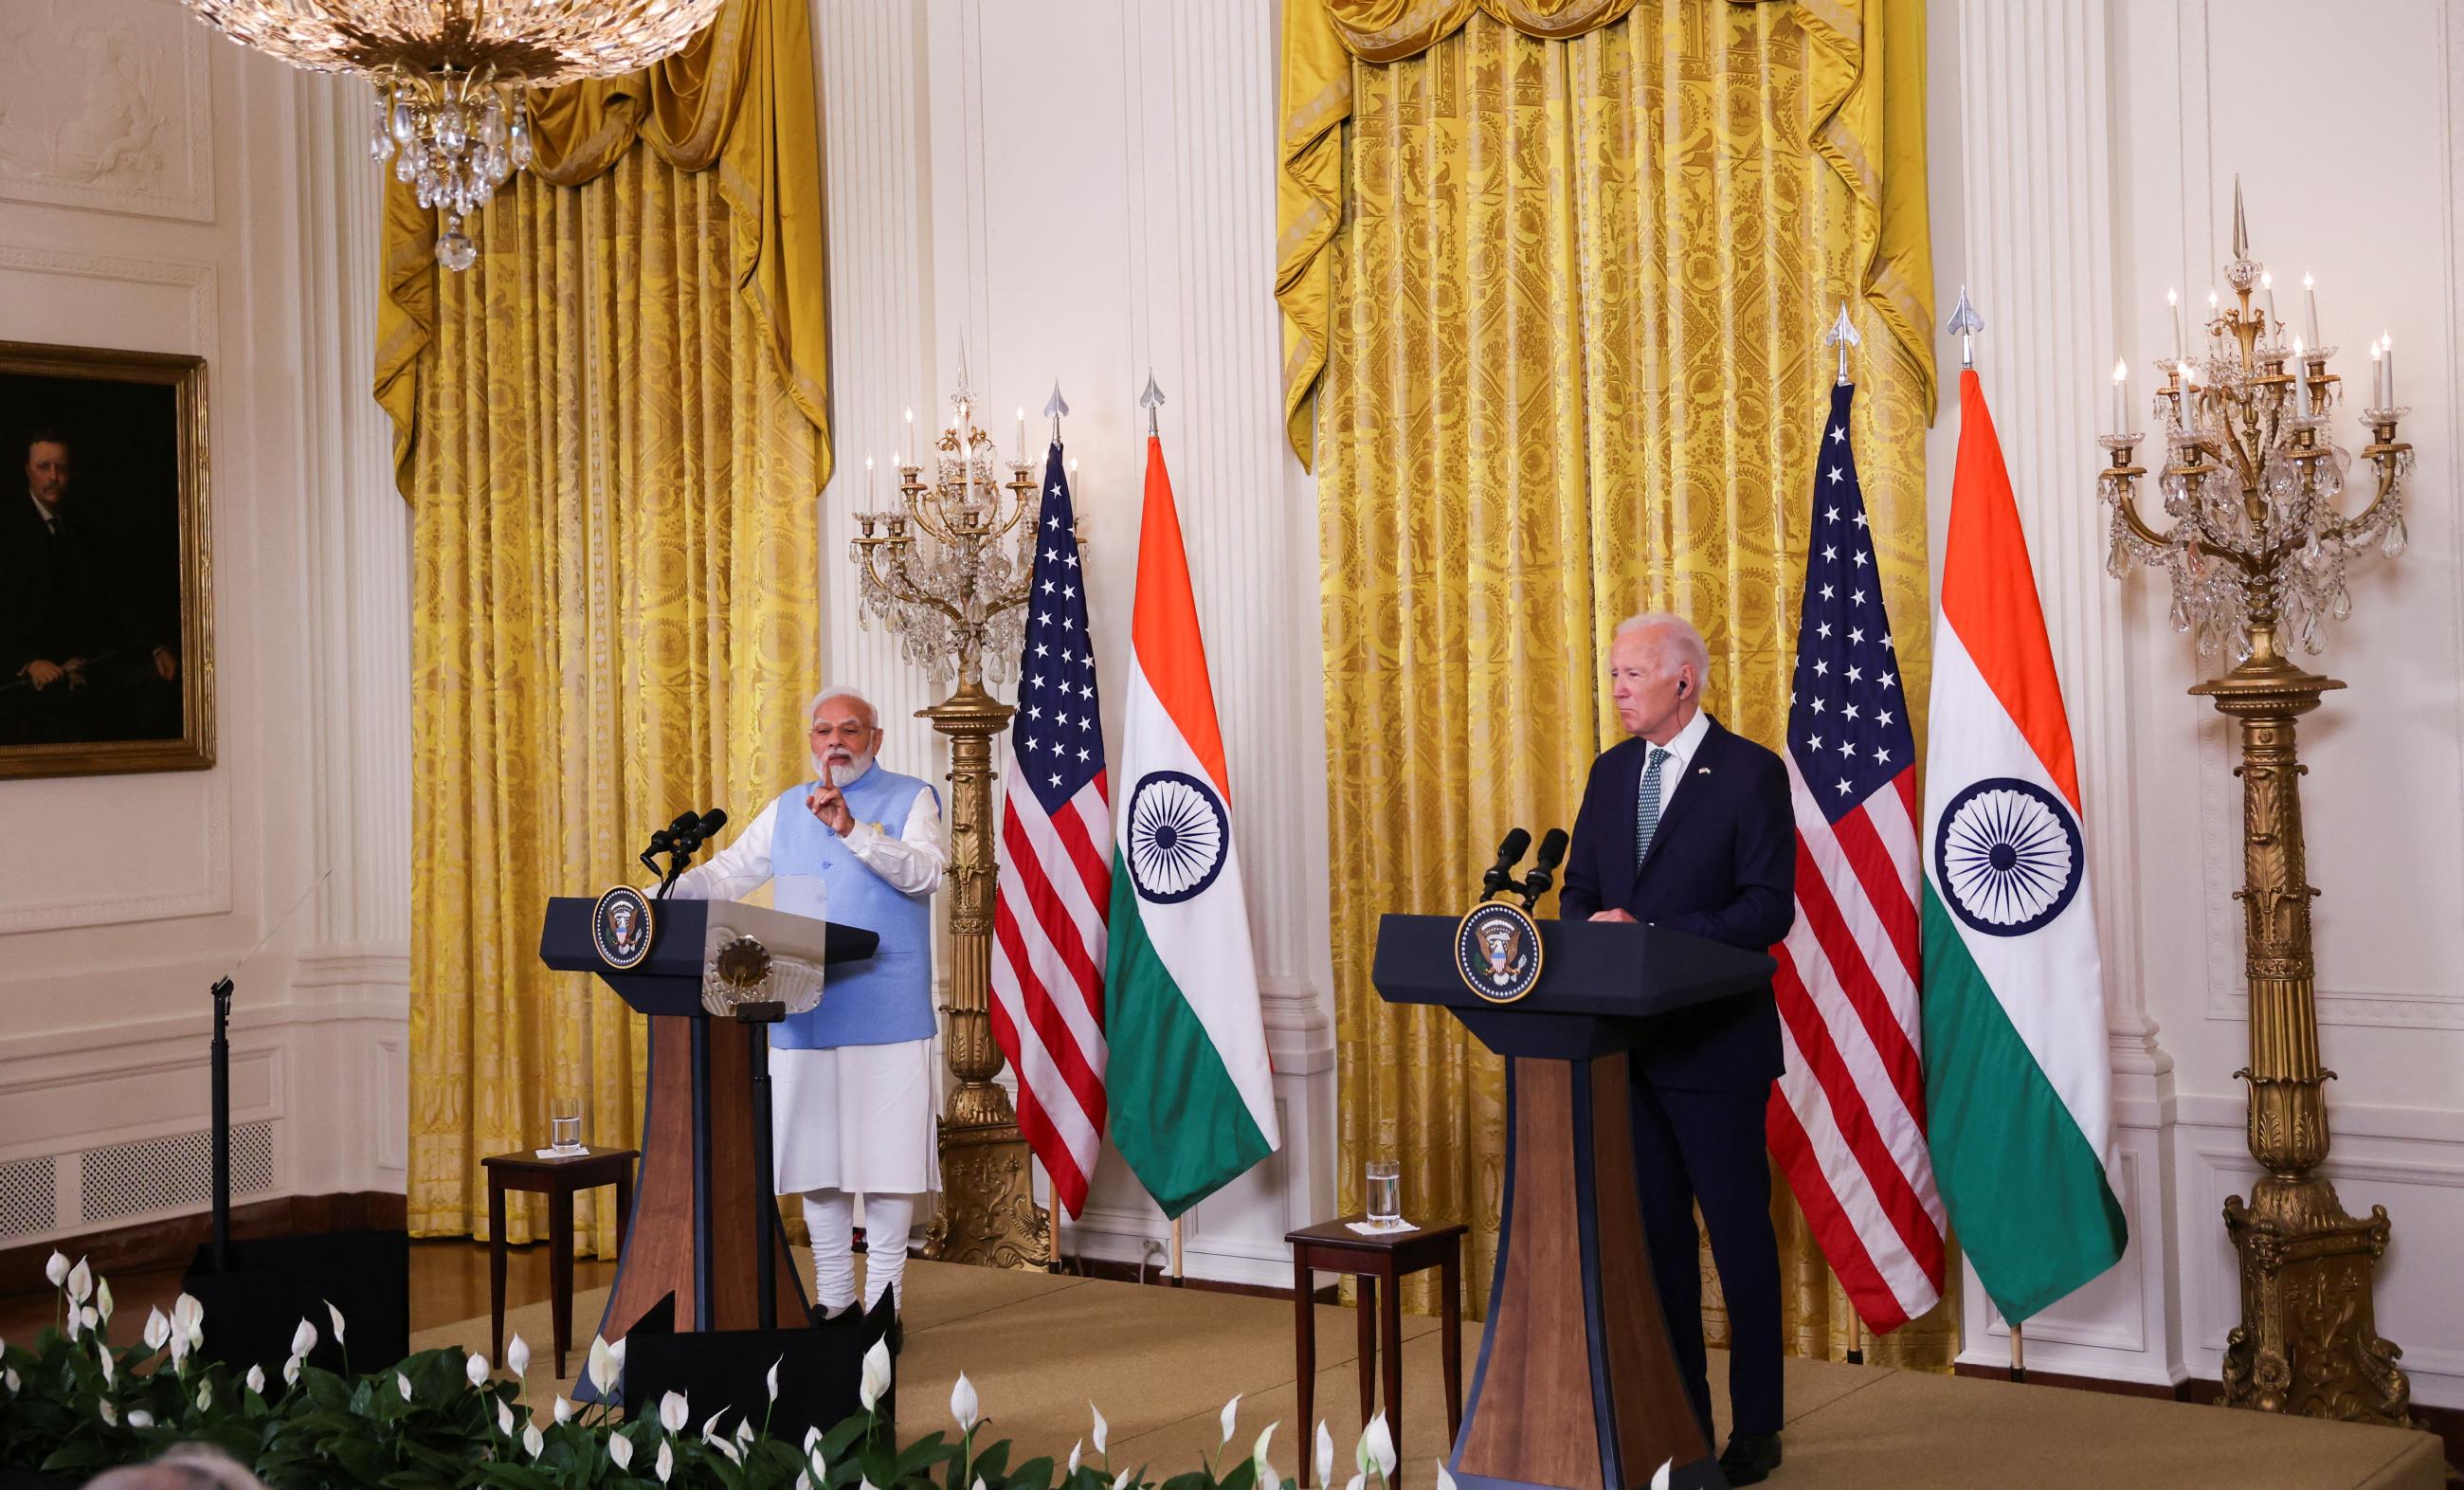 India’s Prime Minister Narendra Modi answers a question during a joint press conference with U.S. President Joe Biden at the White House in Washington, U.S., June 22, 2023.